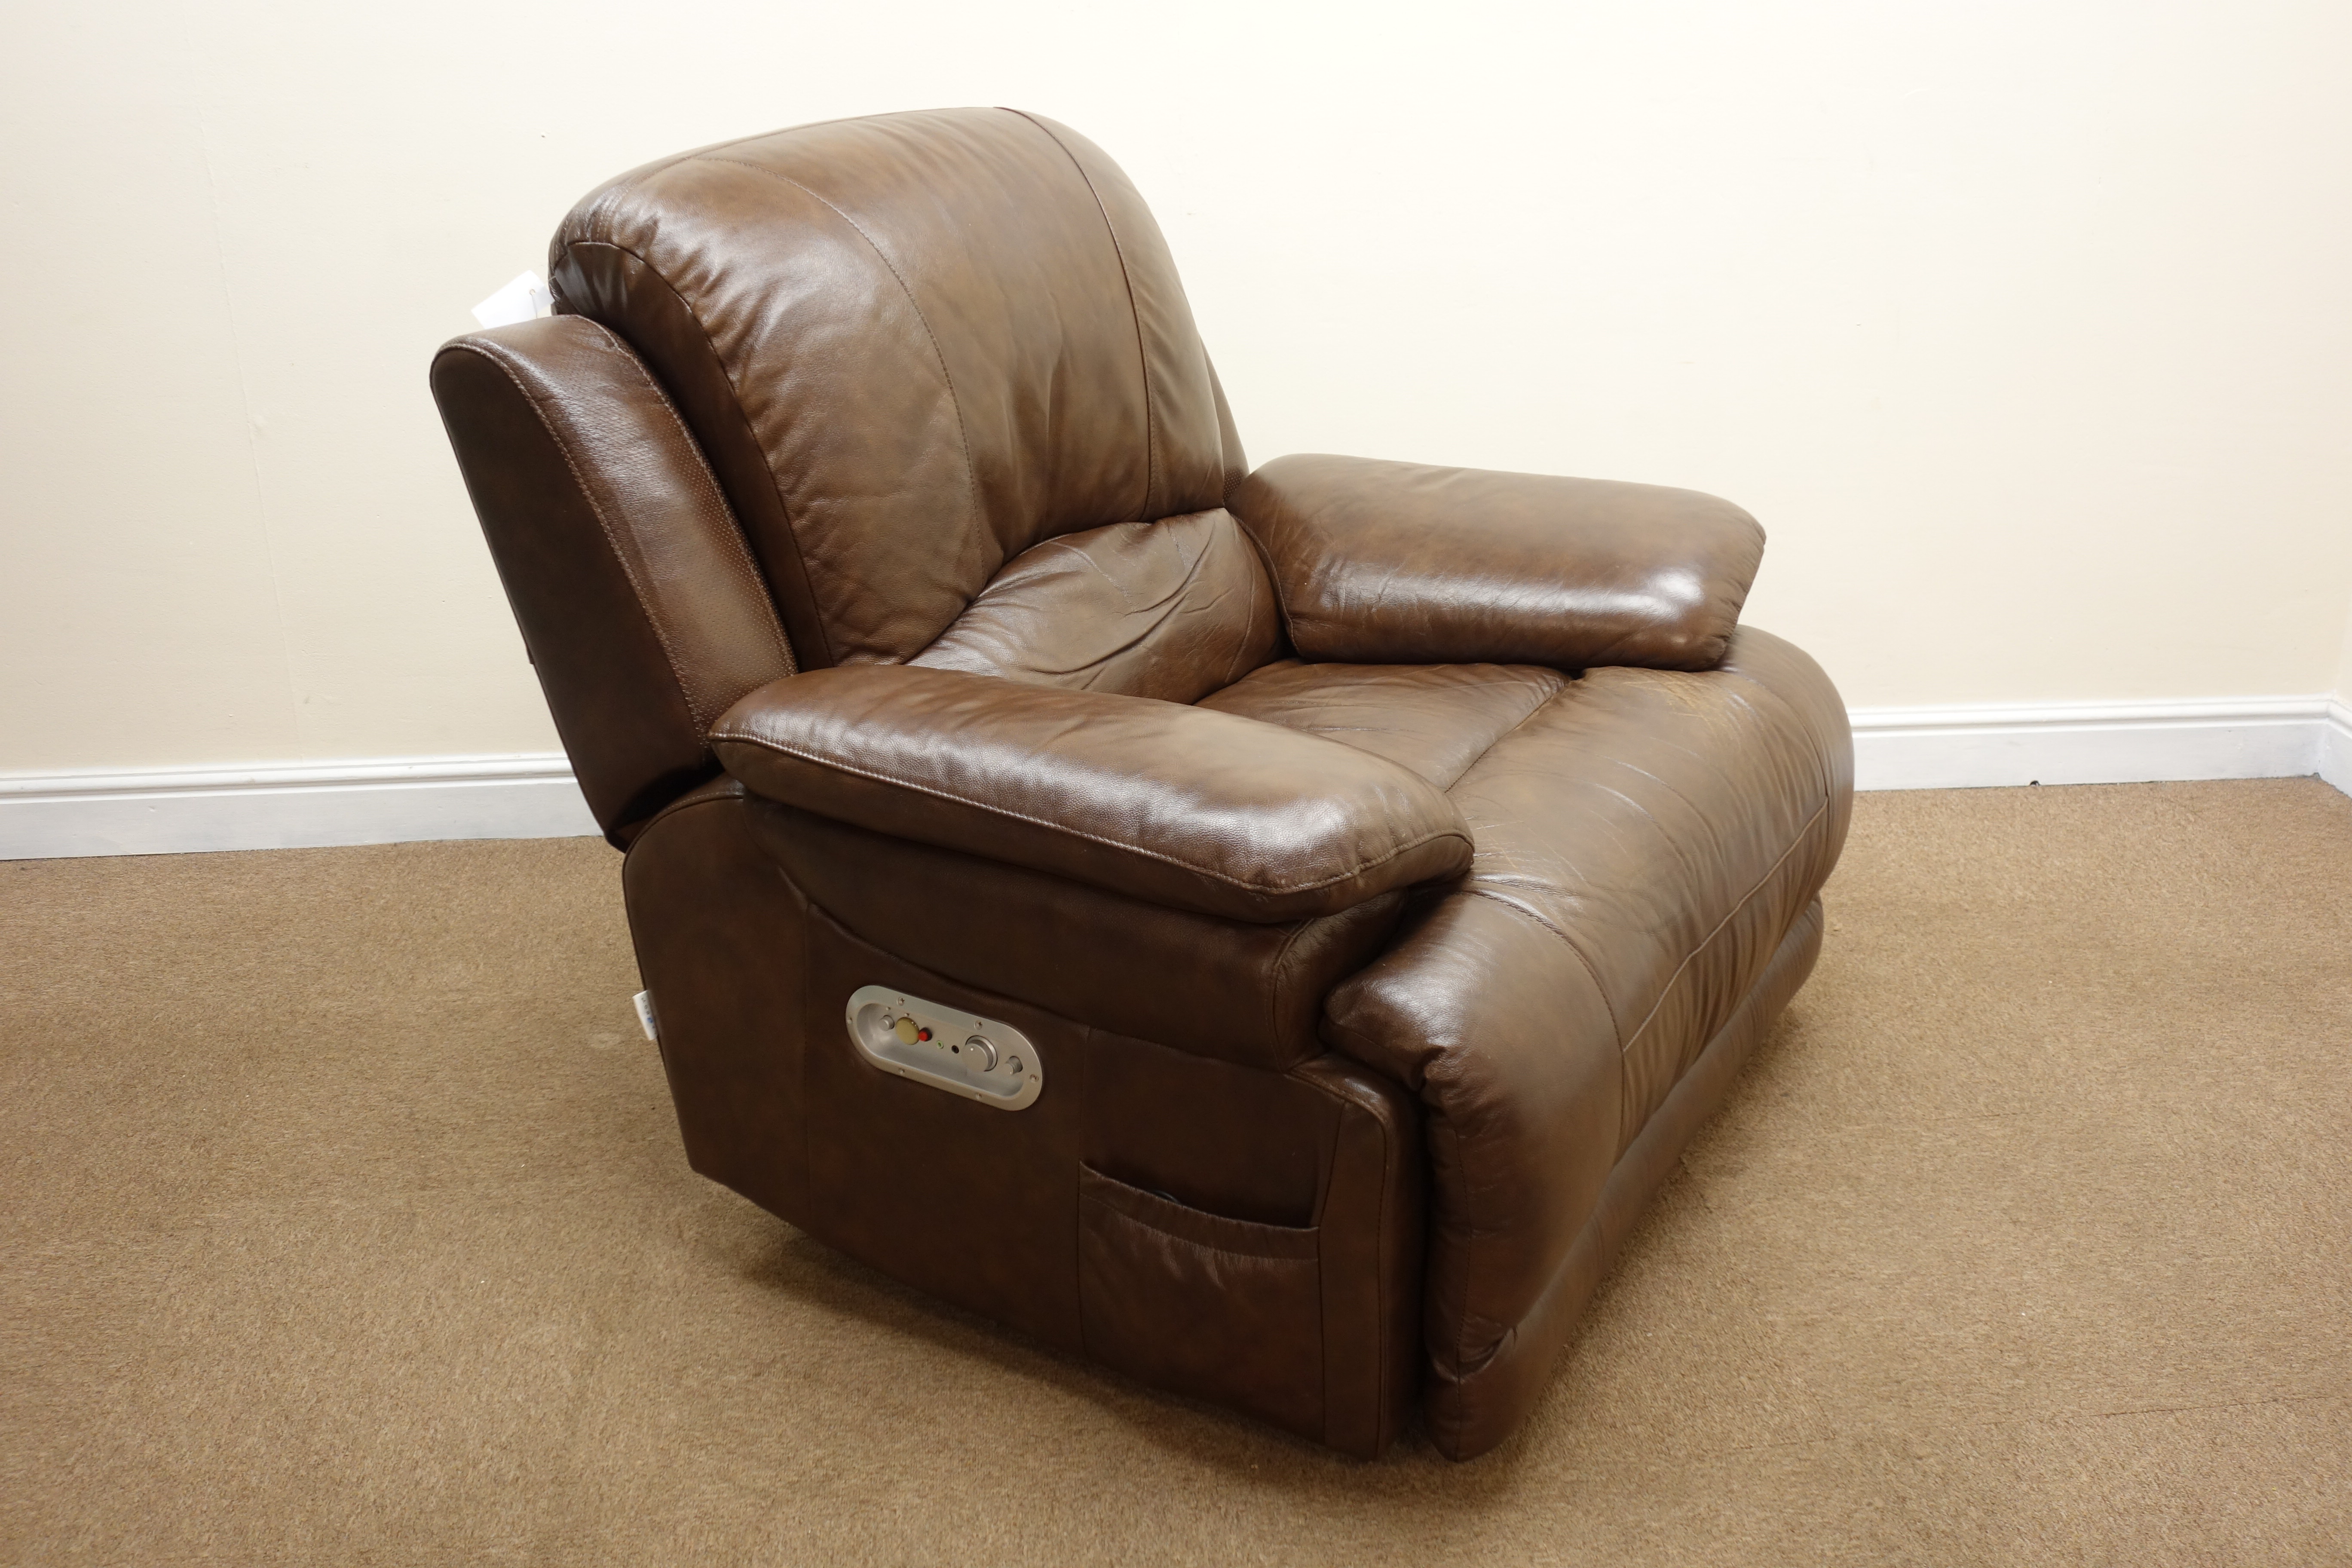 La-z-boy electric reclining armchair with speakers, Bluetooth connectivity, fridge and massage unit,